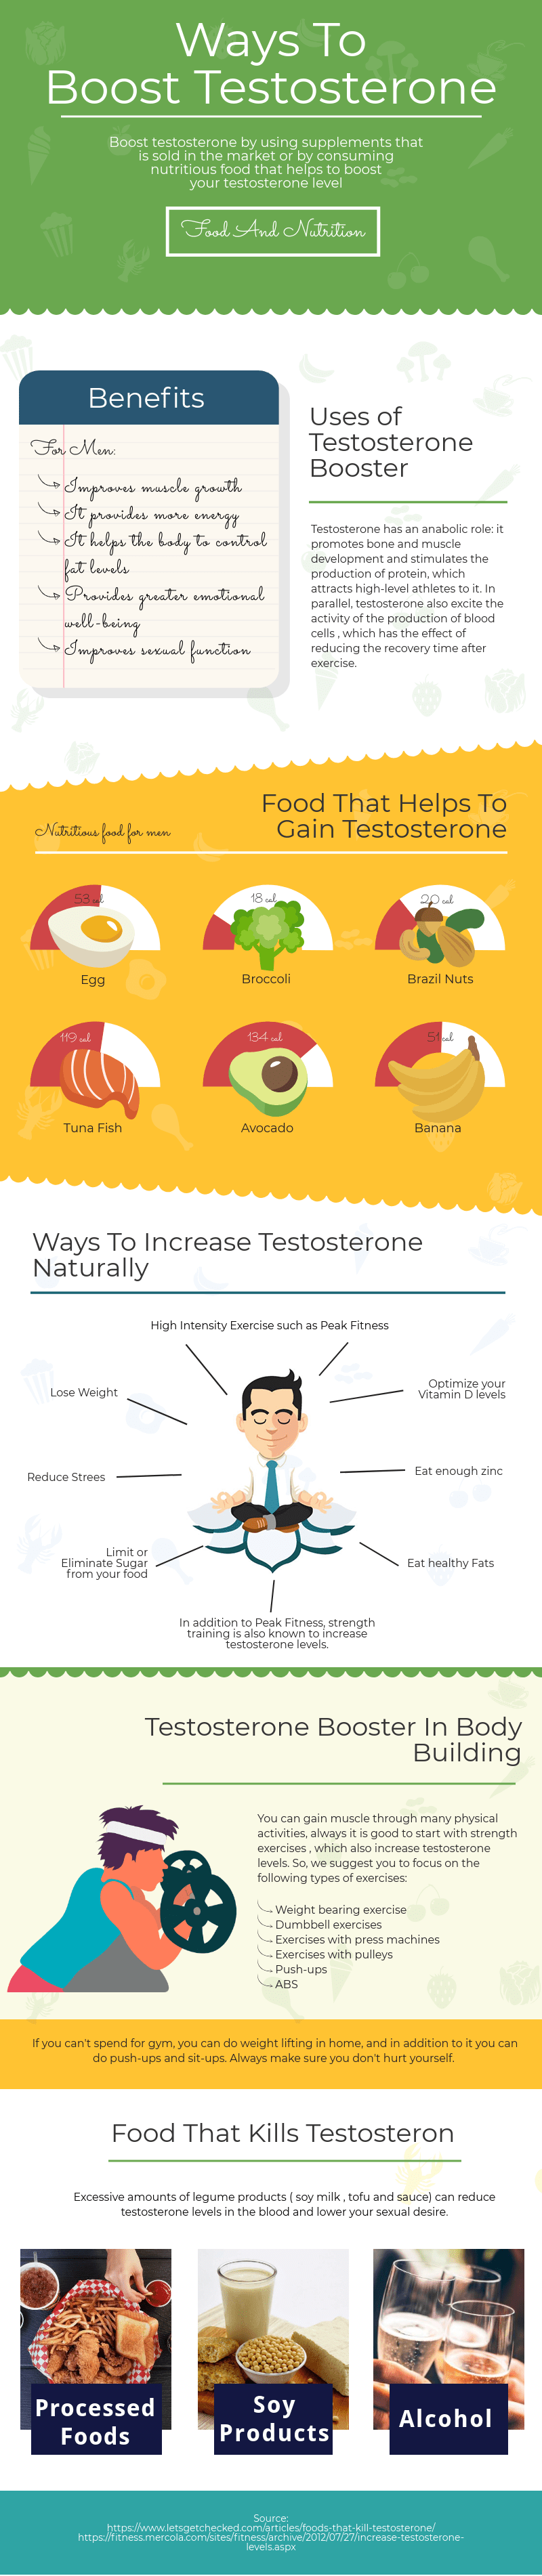 HOW TO INCREASE TESTOSTERONE